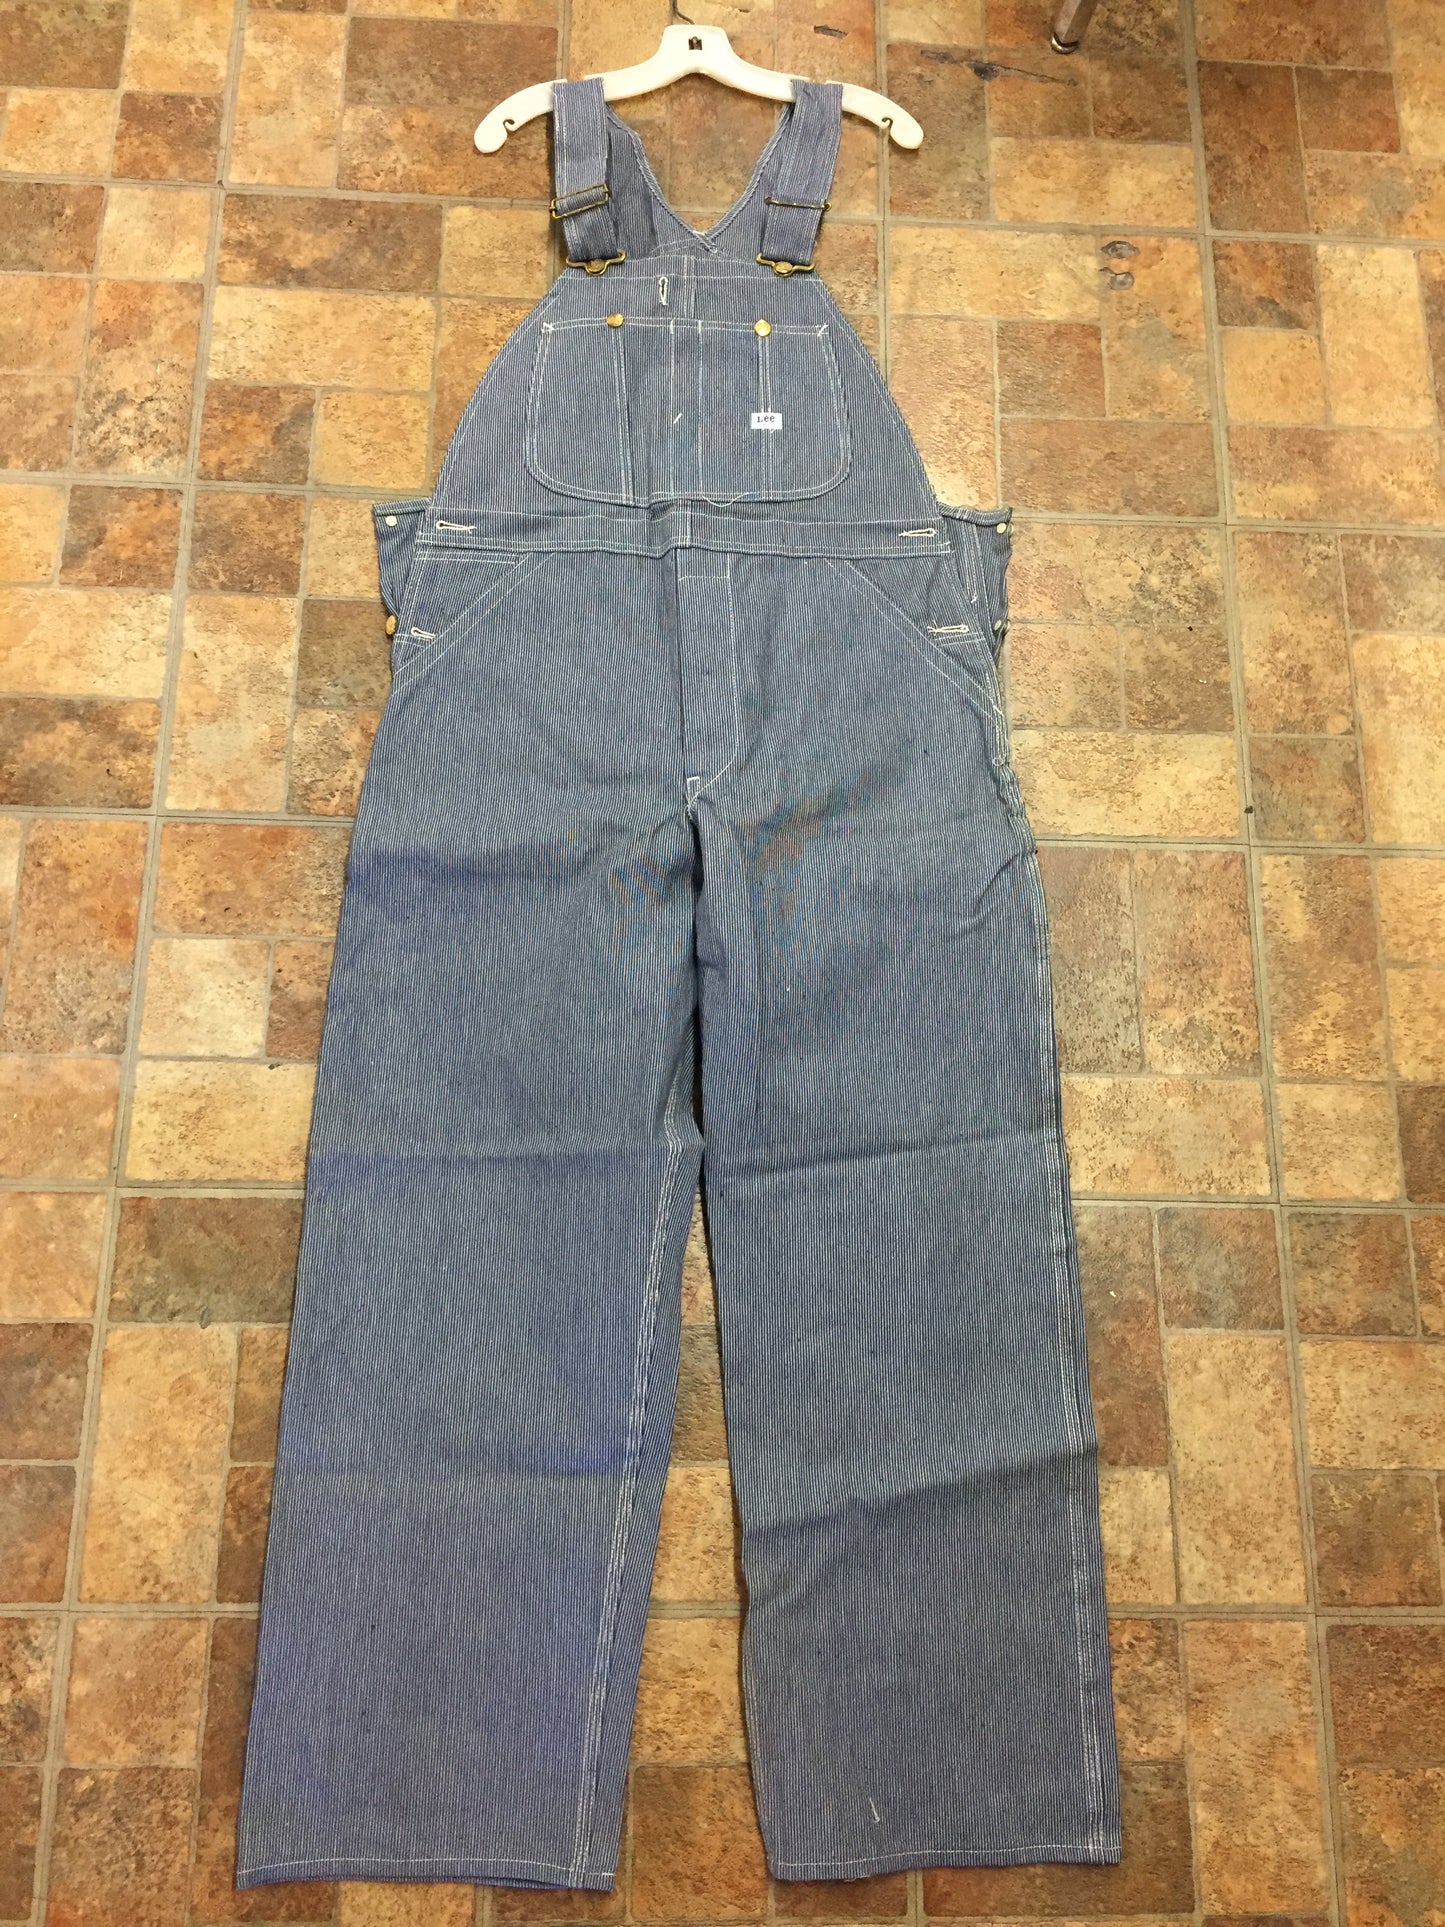 Vintage 1960's NOS Lee Denim Work Overall Hickory Stripe Union Made Sanforized NWT (New with Tags)